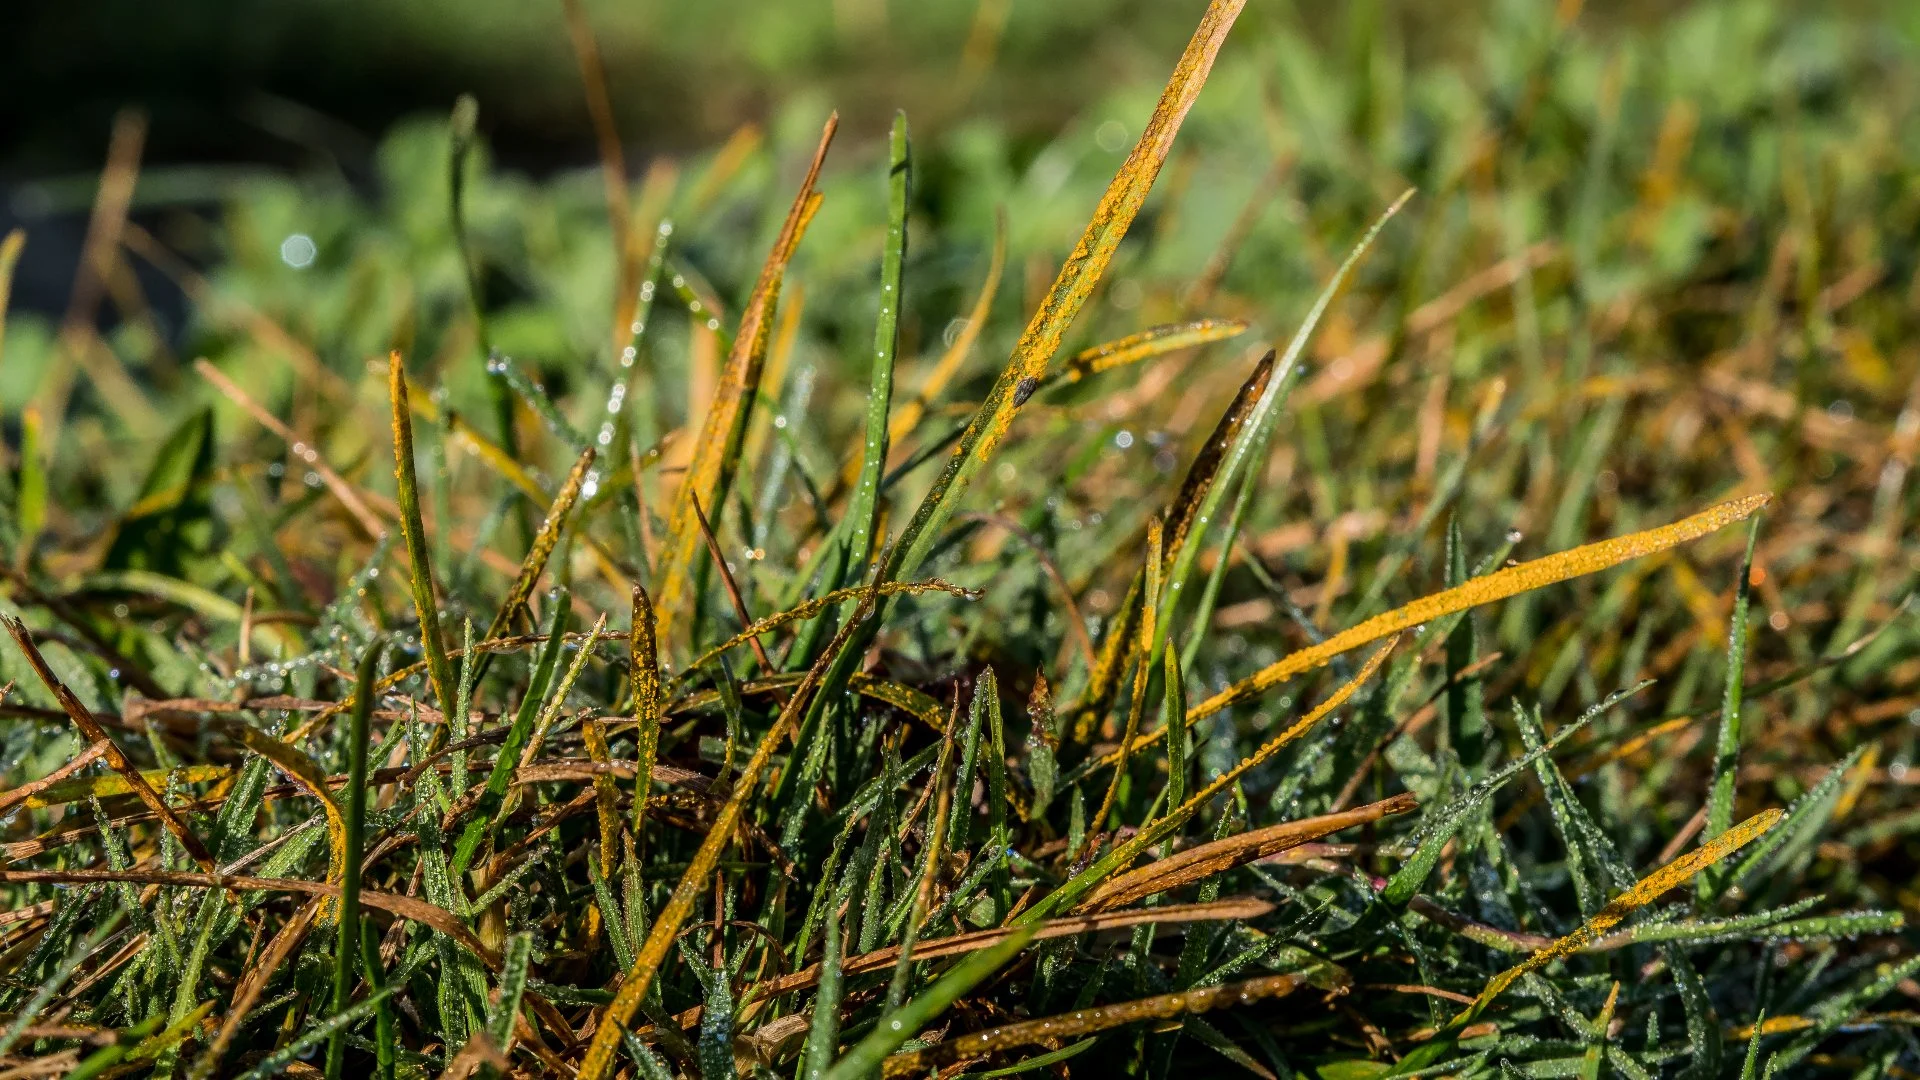 Lawn Rust - What Is This Turf Disease & How Do You Deal With It?